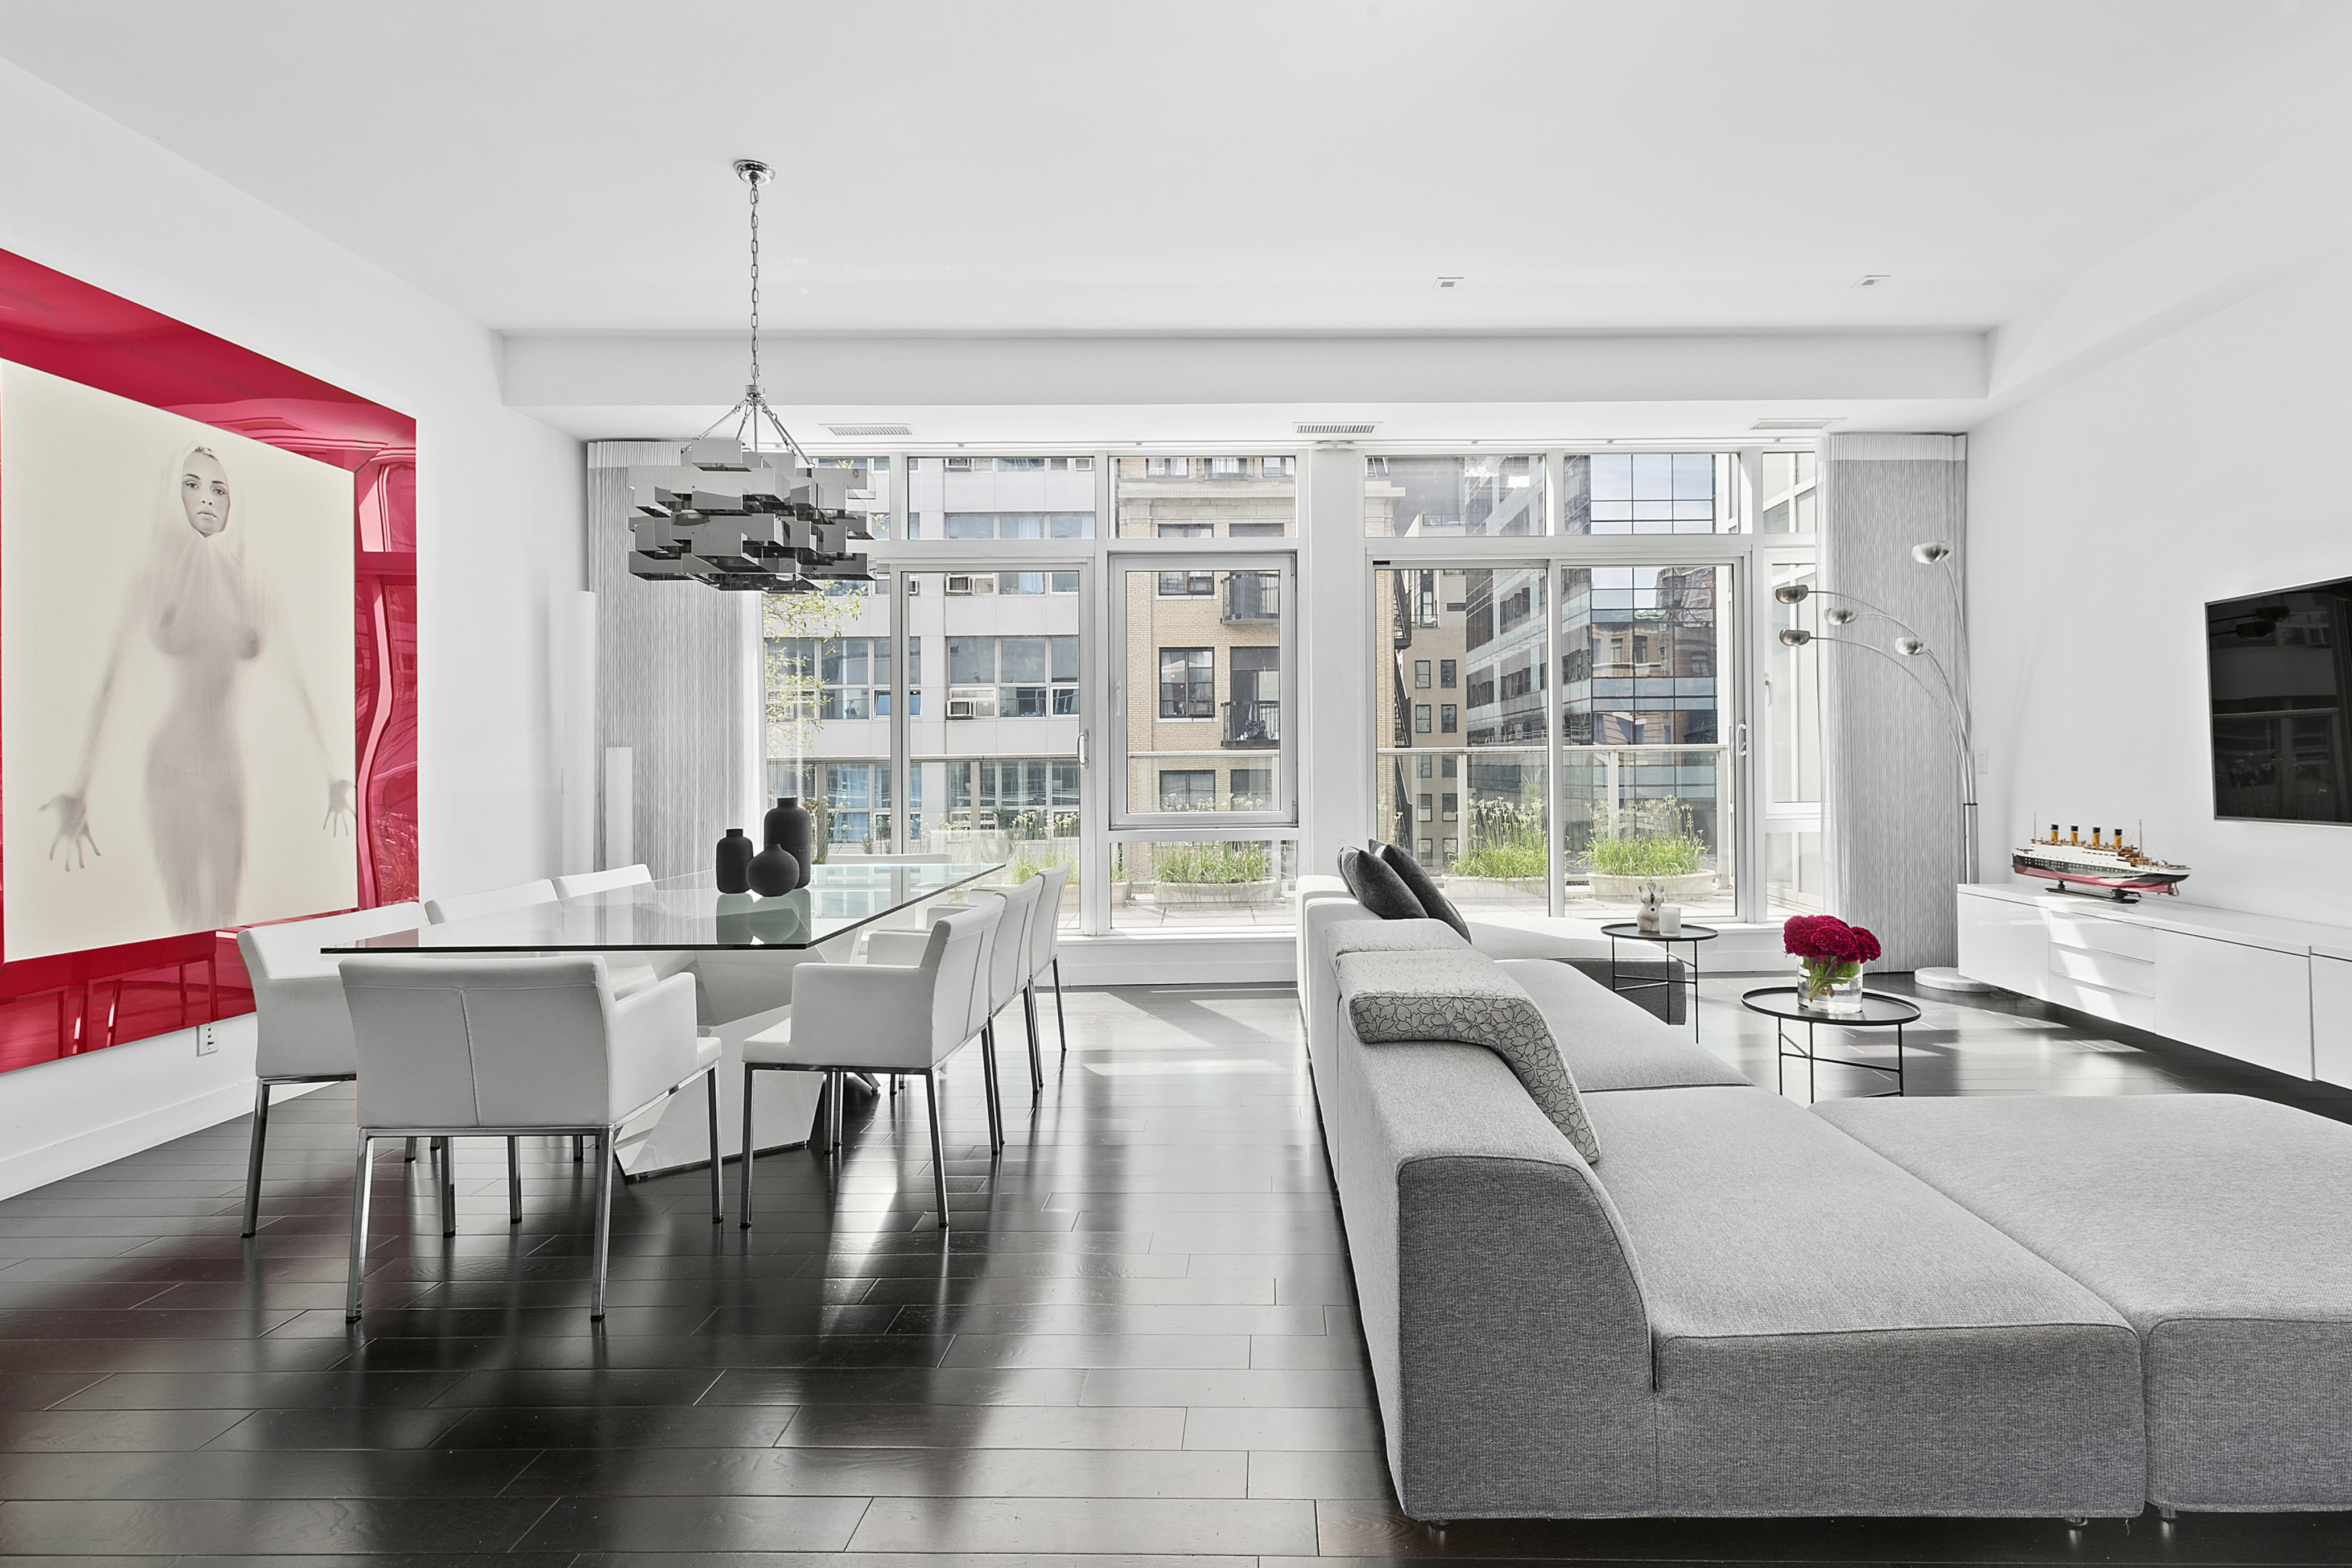 111 Fulton Street Ph211, Financial District, Downtown, NYC - 2 Bedrooms  
2.5 Bathrooms  
4 Rooms - 